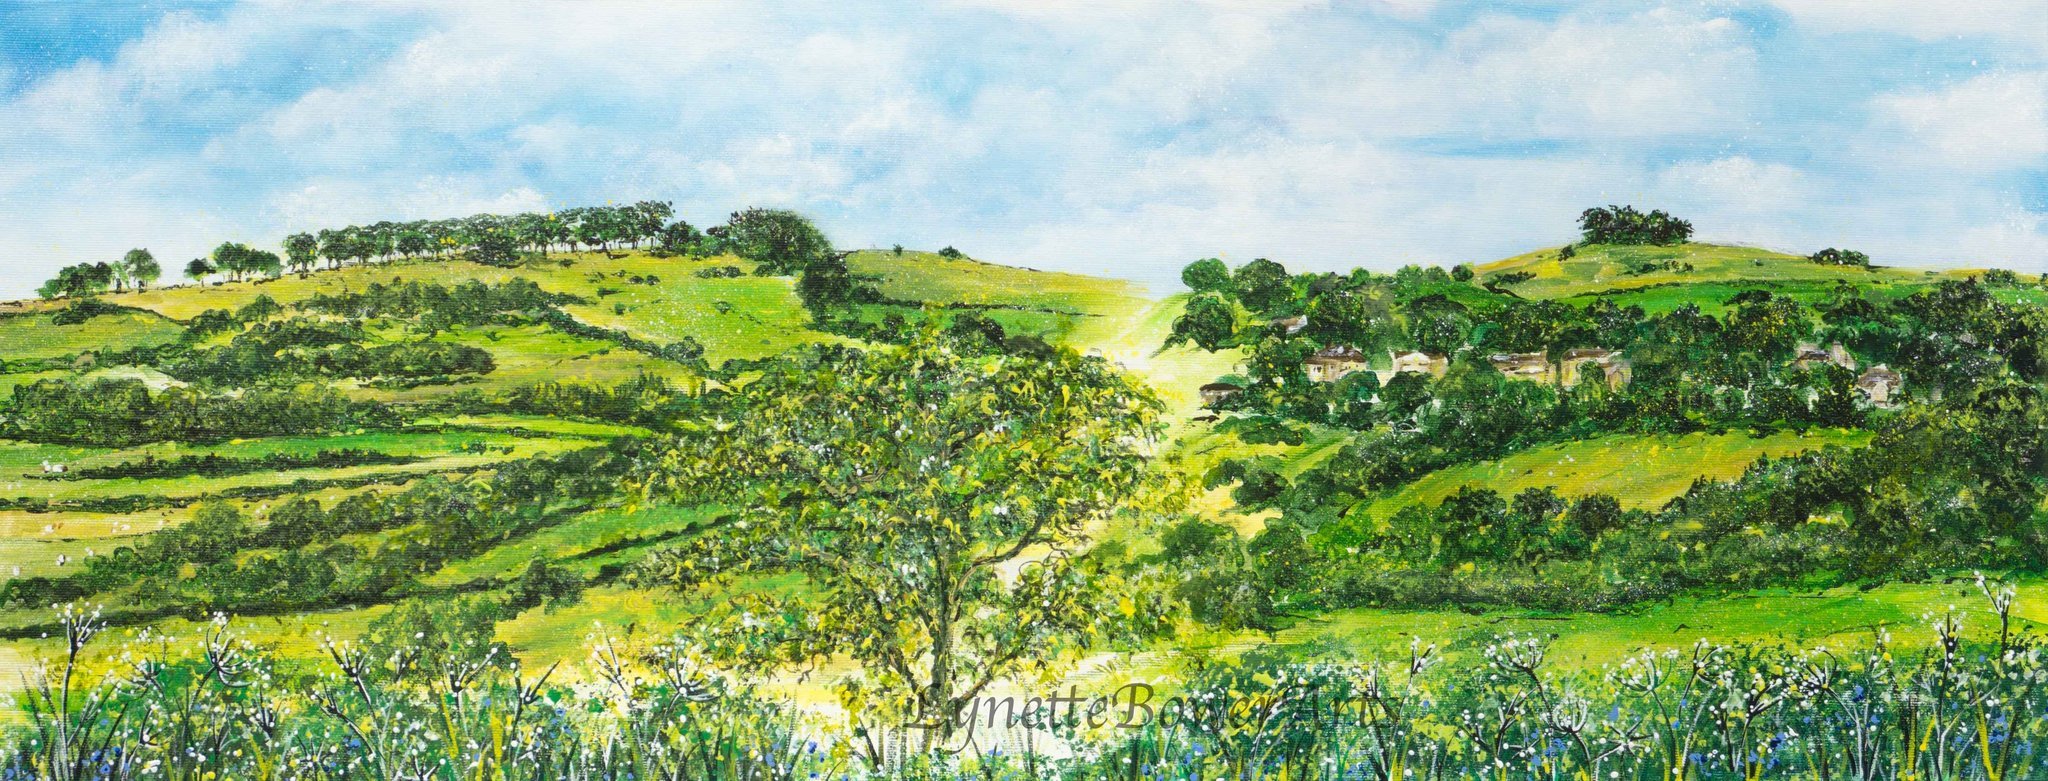 Kelston Roundhill and The Caterpillar canvas print at The Bath Art Shop